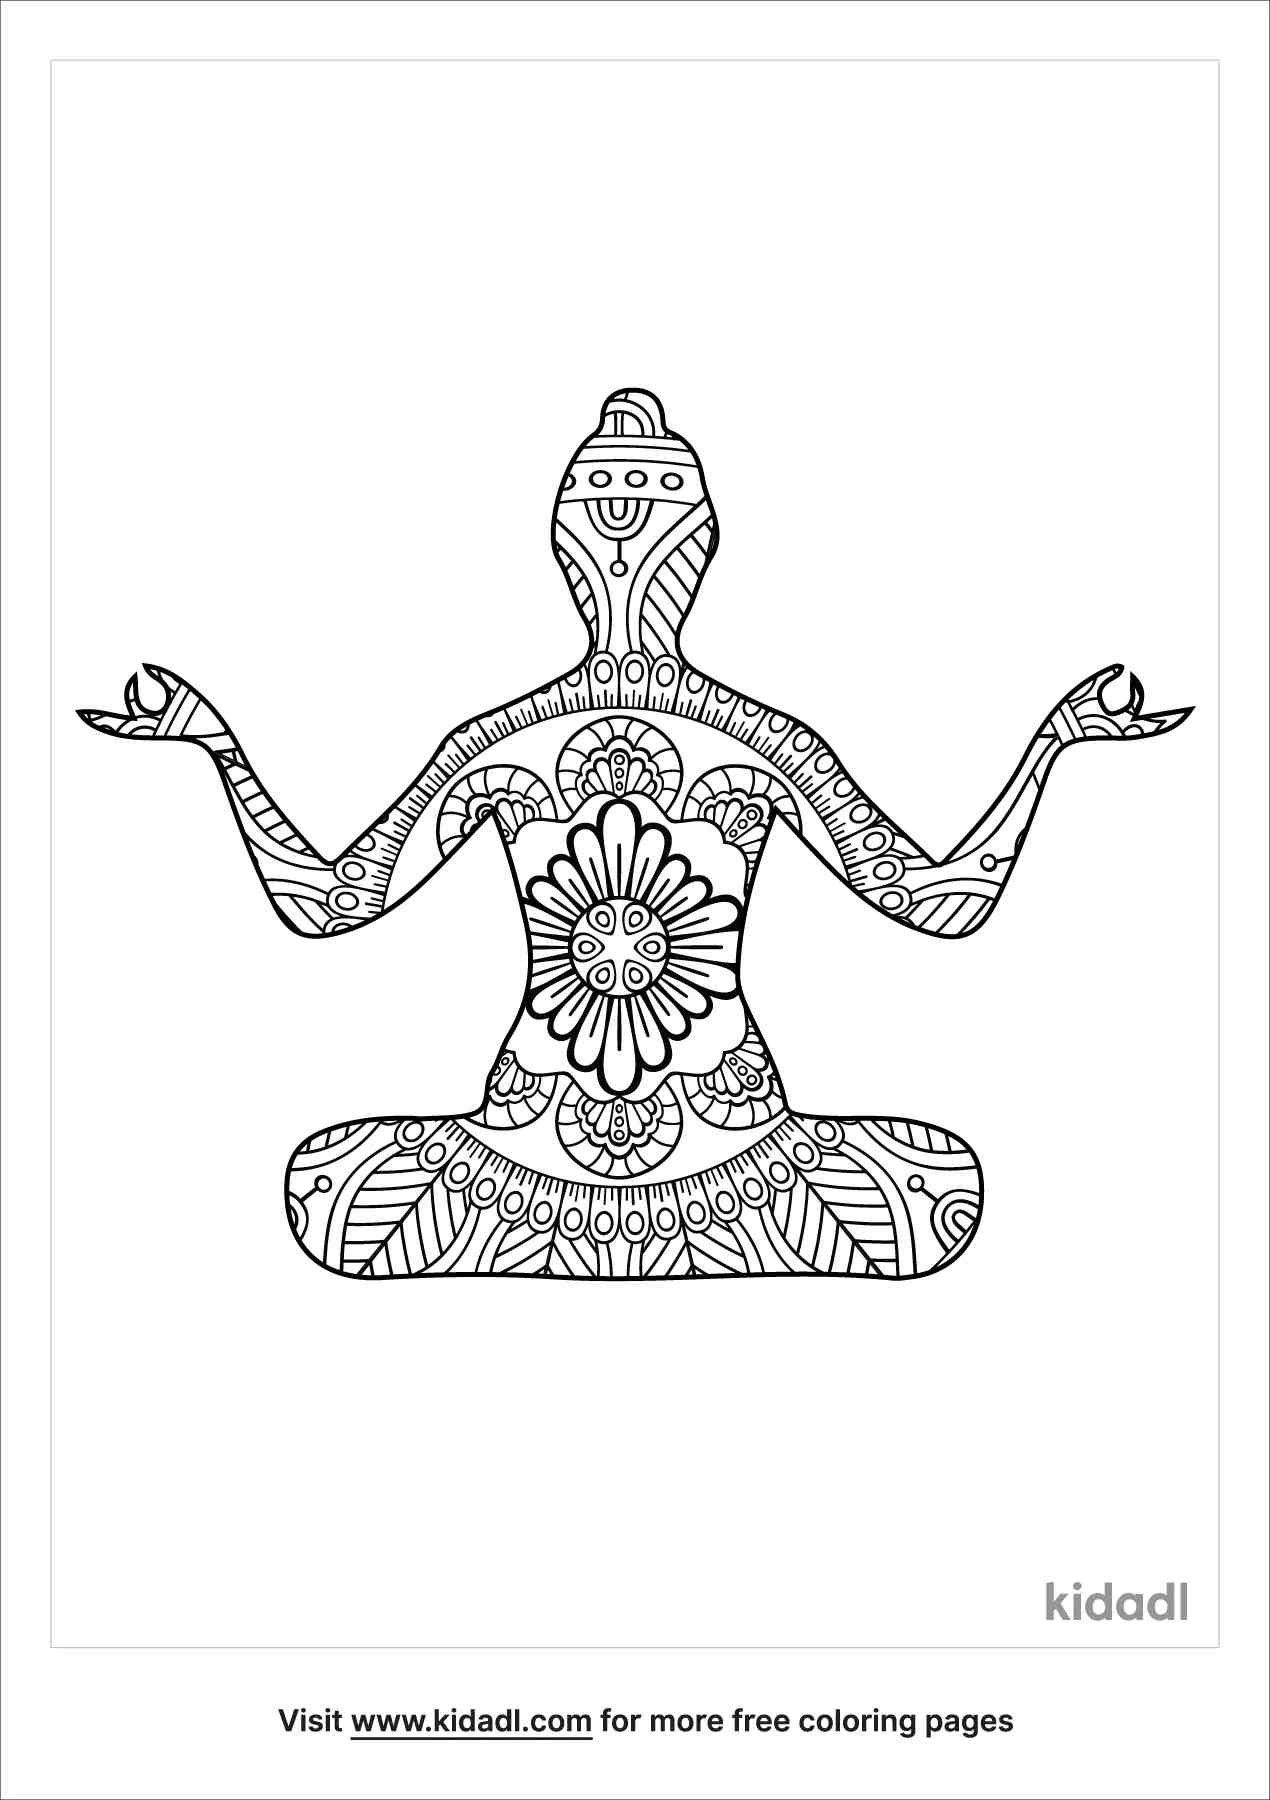 Coloring pages for mindfulness